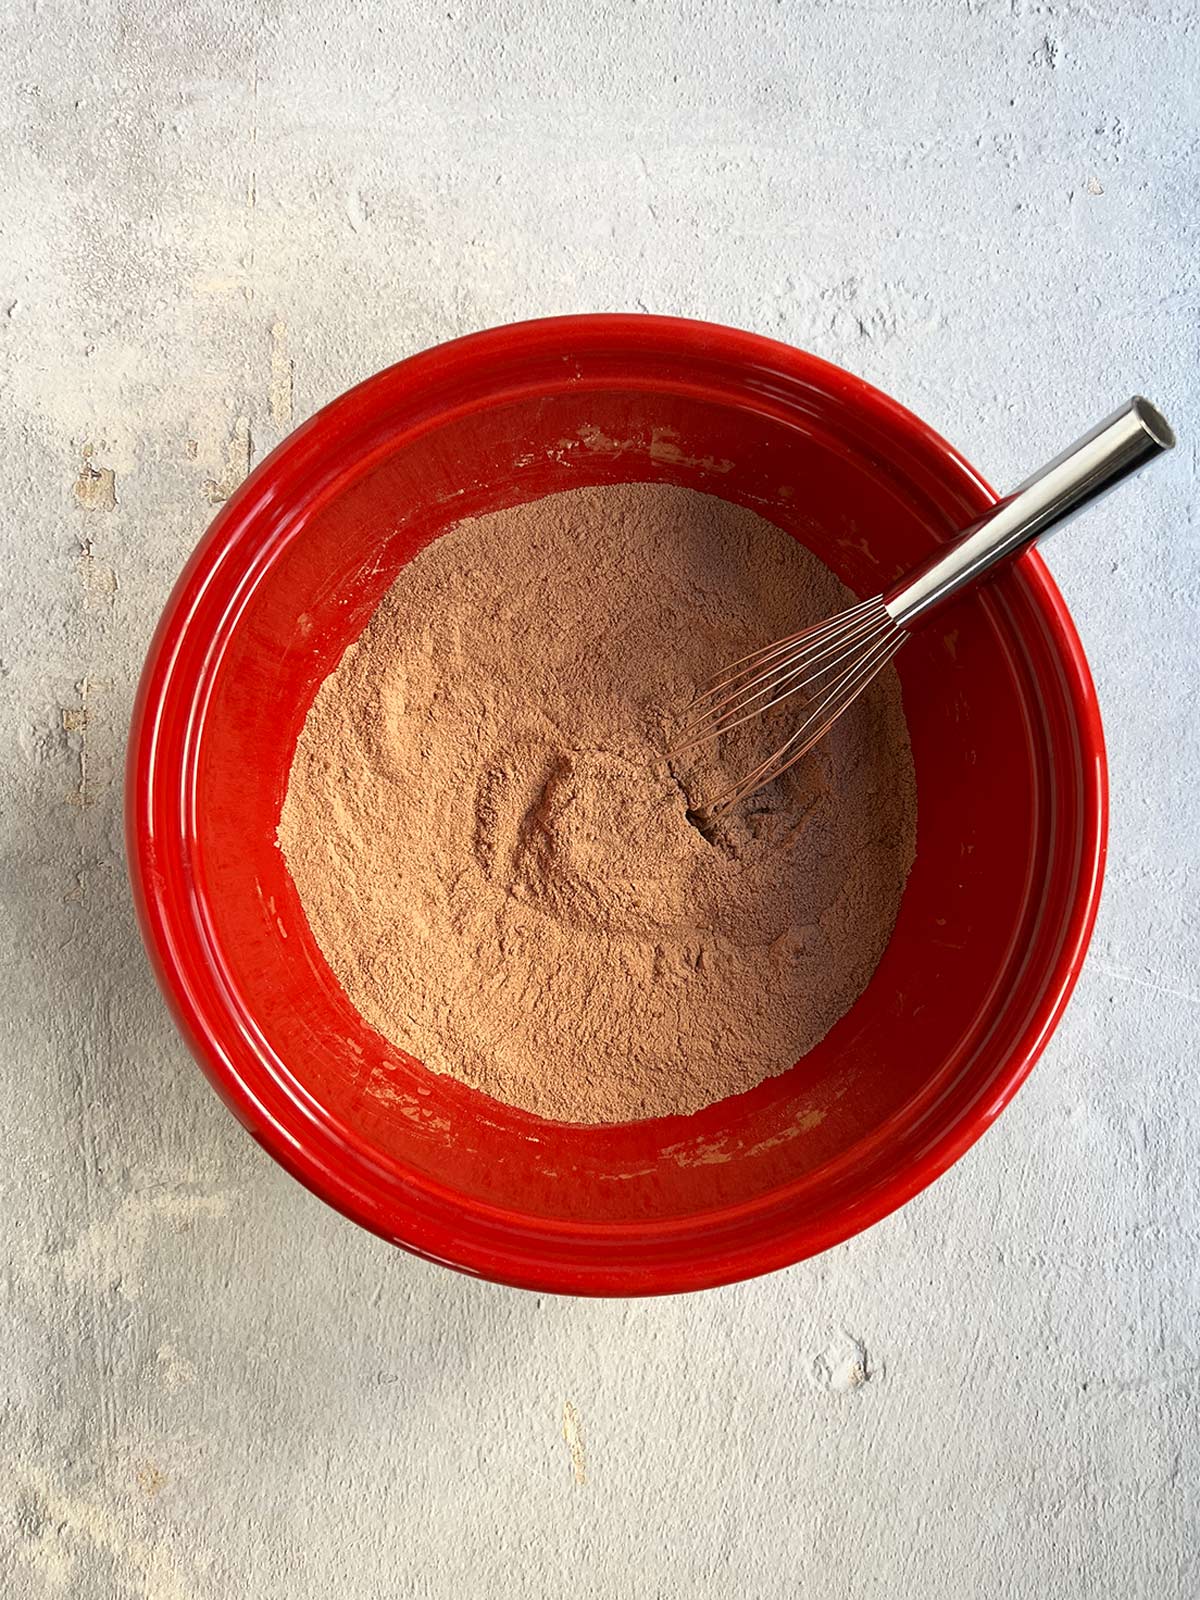 Dry ingredients for chocolate cake in a red bowl with a whisk.